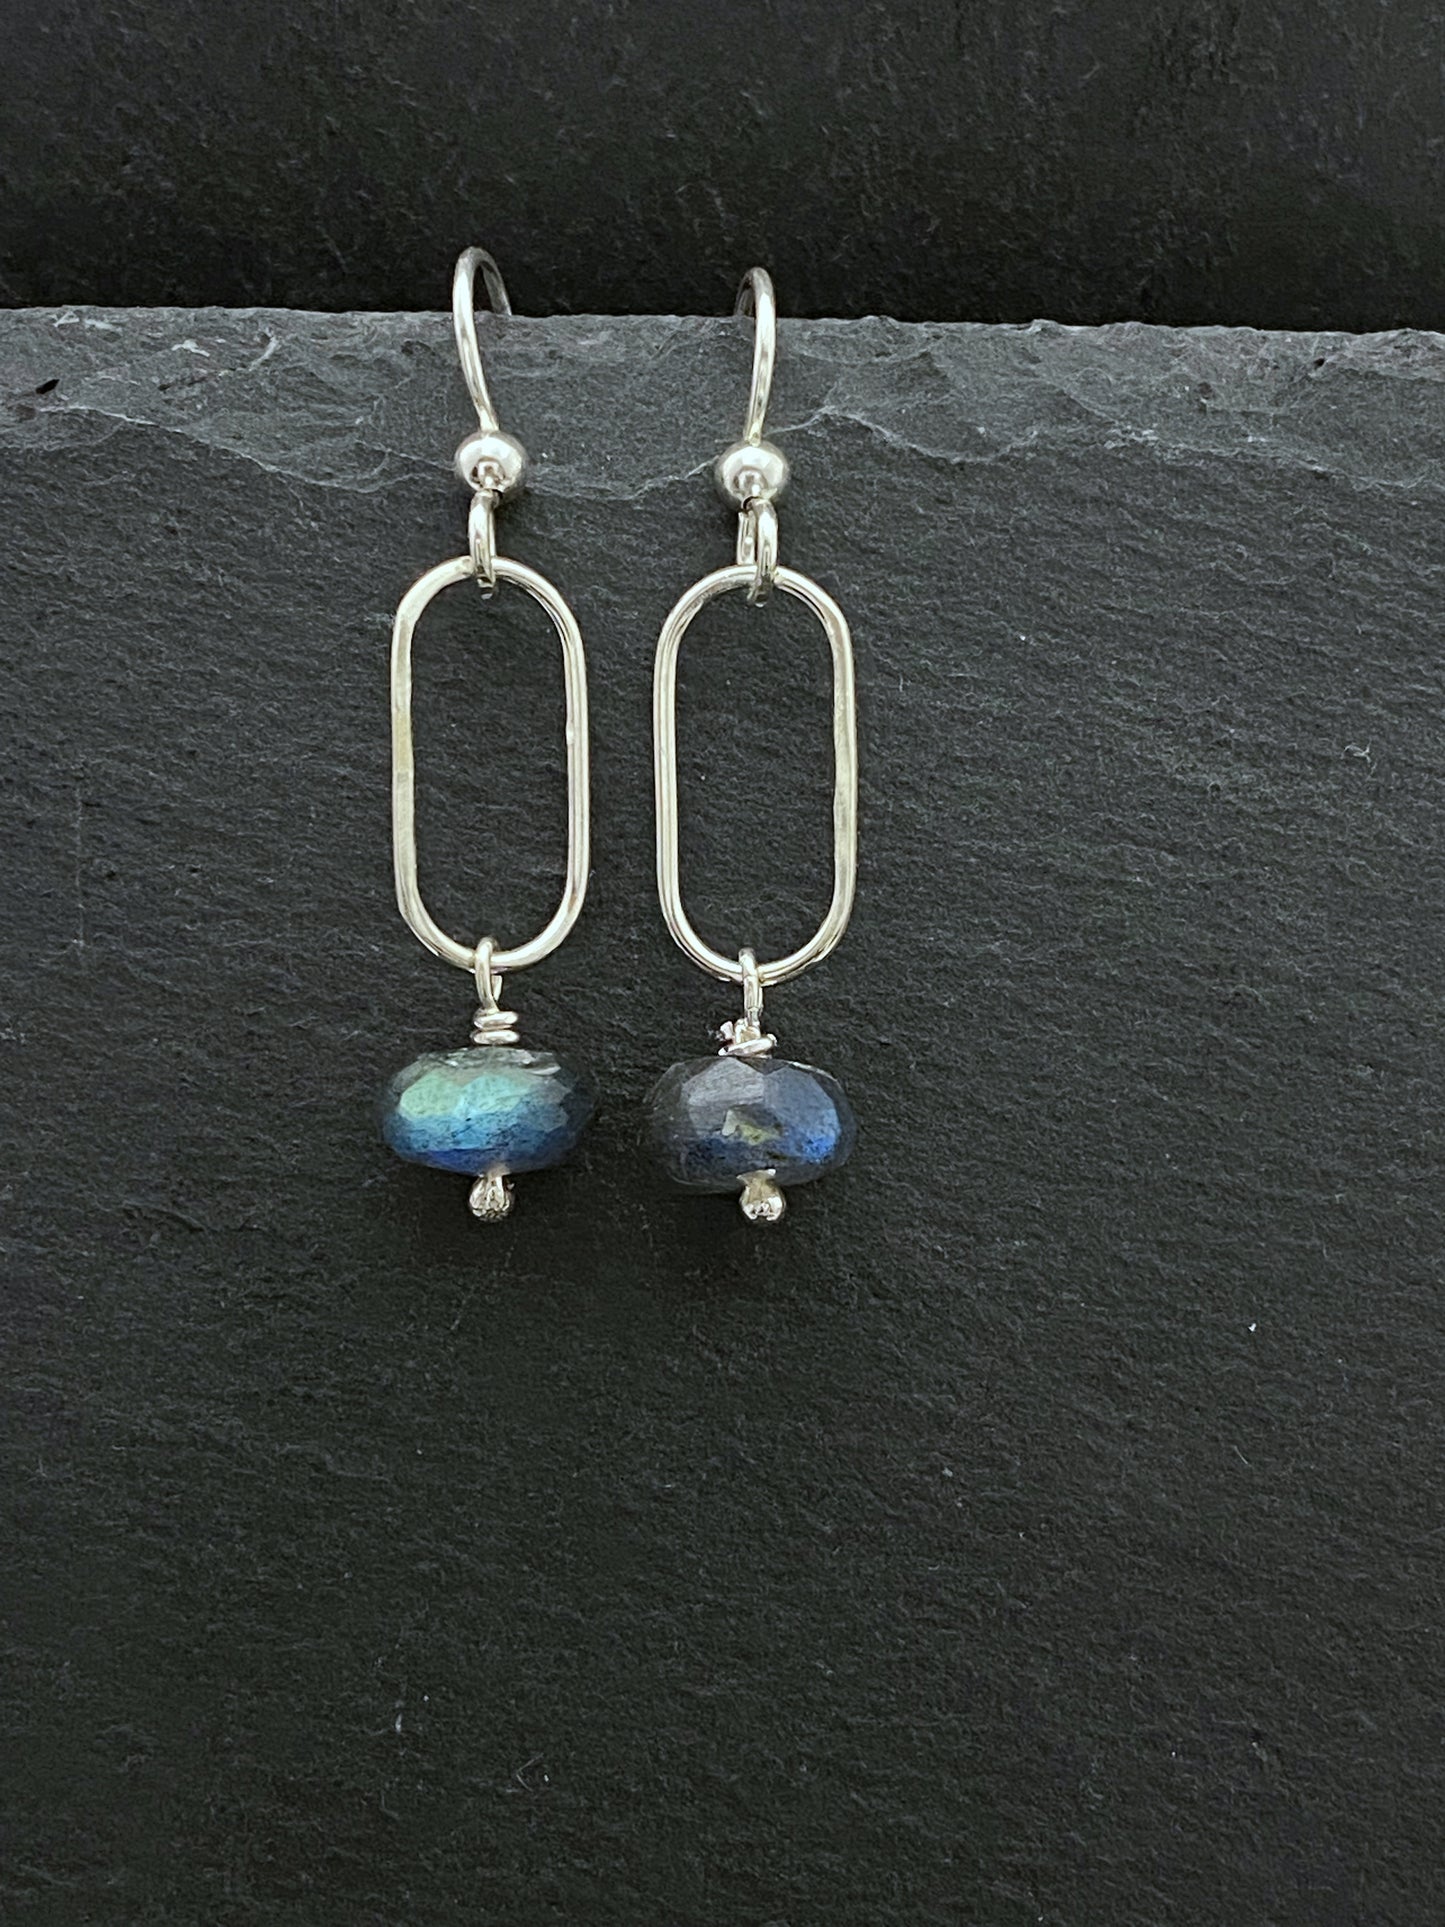 Sterling silver forged earrings with labradorite gemstones